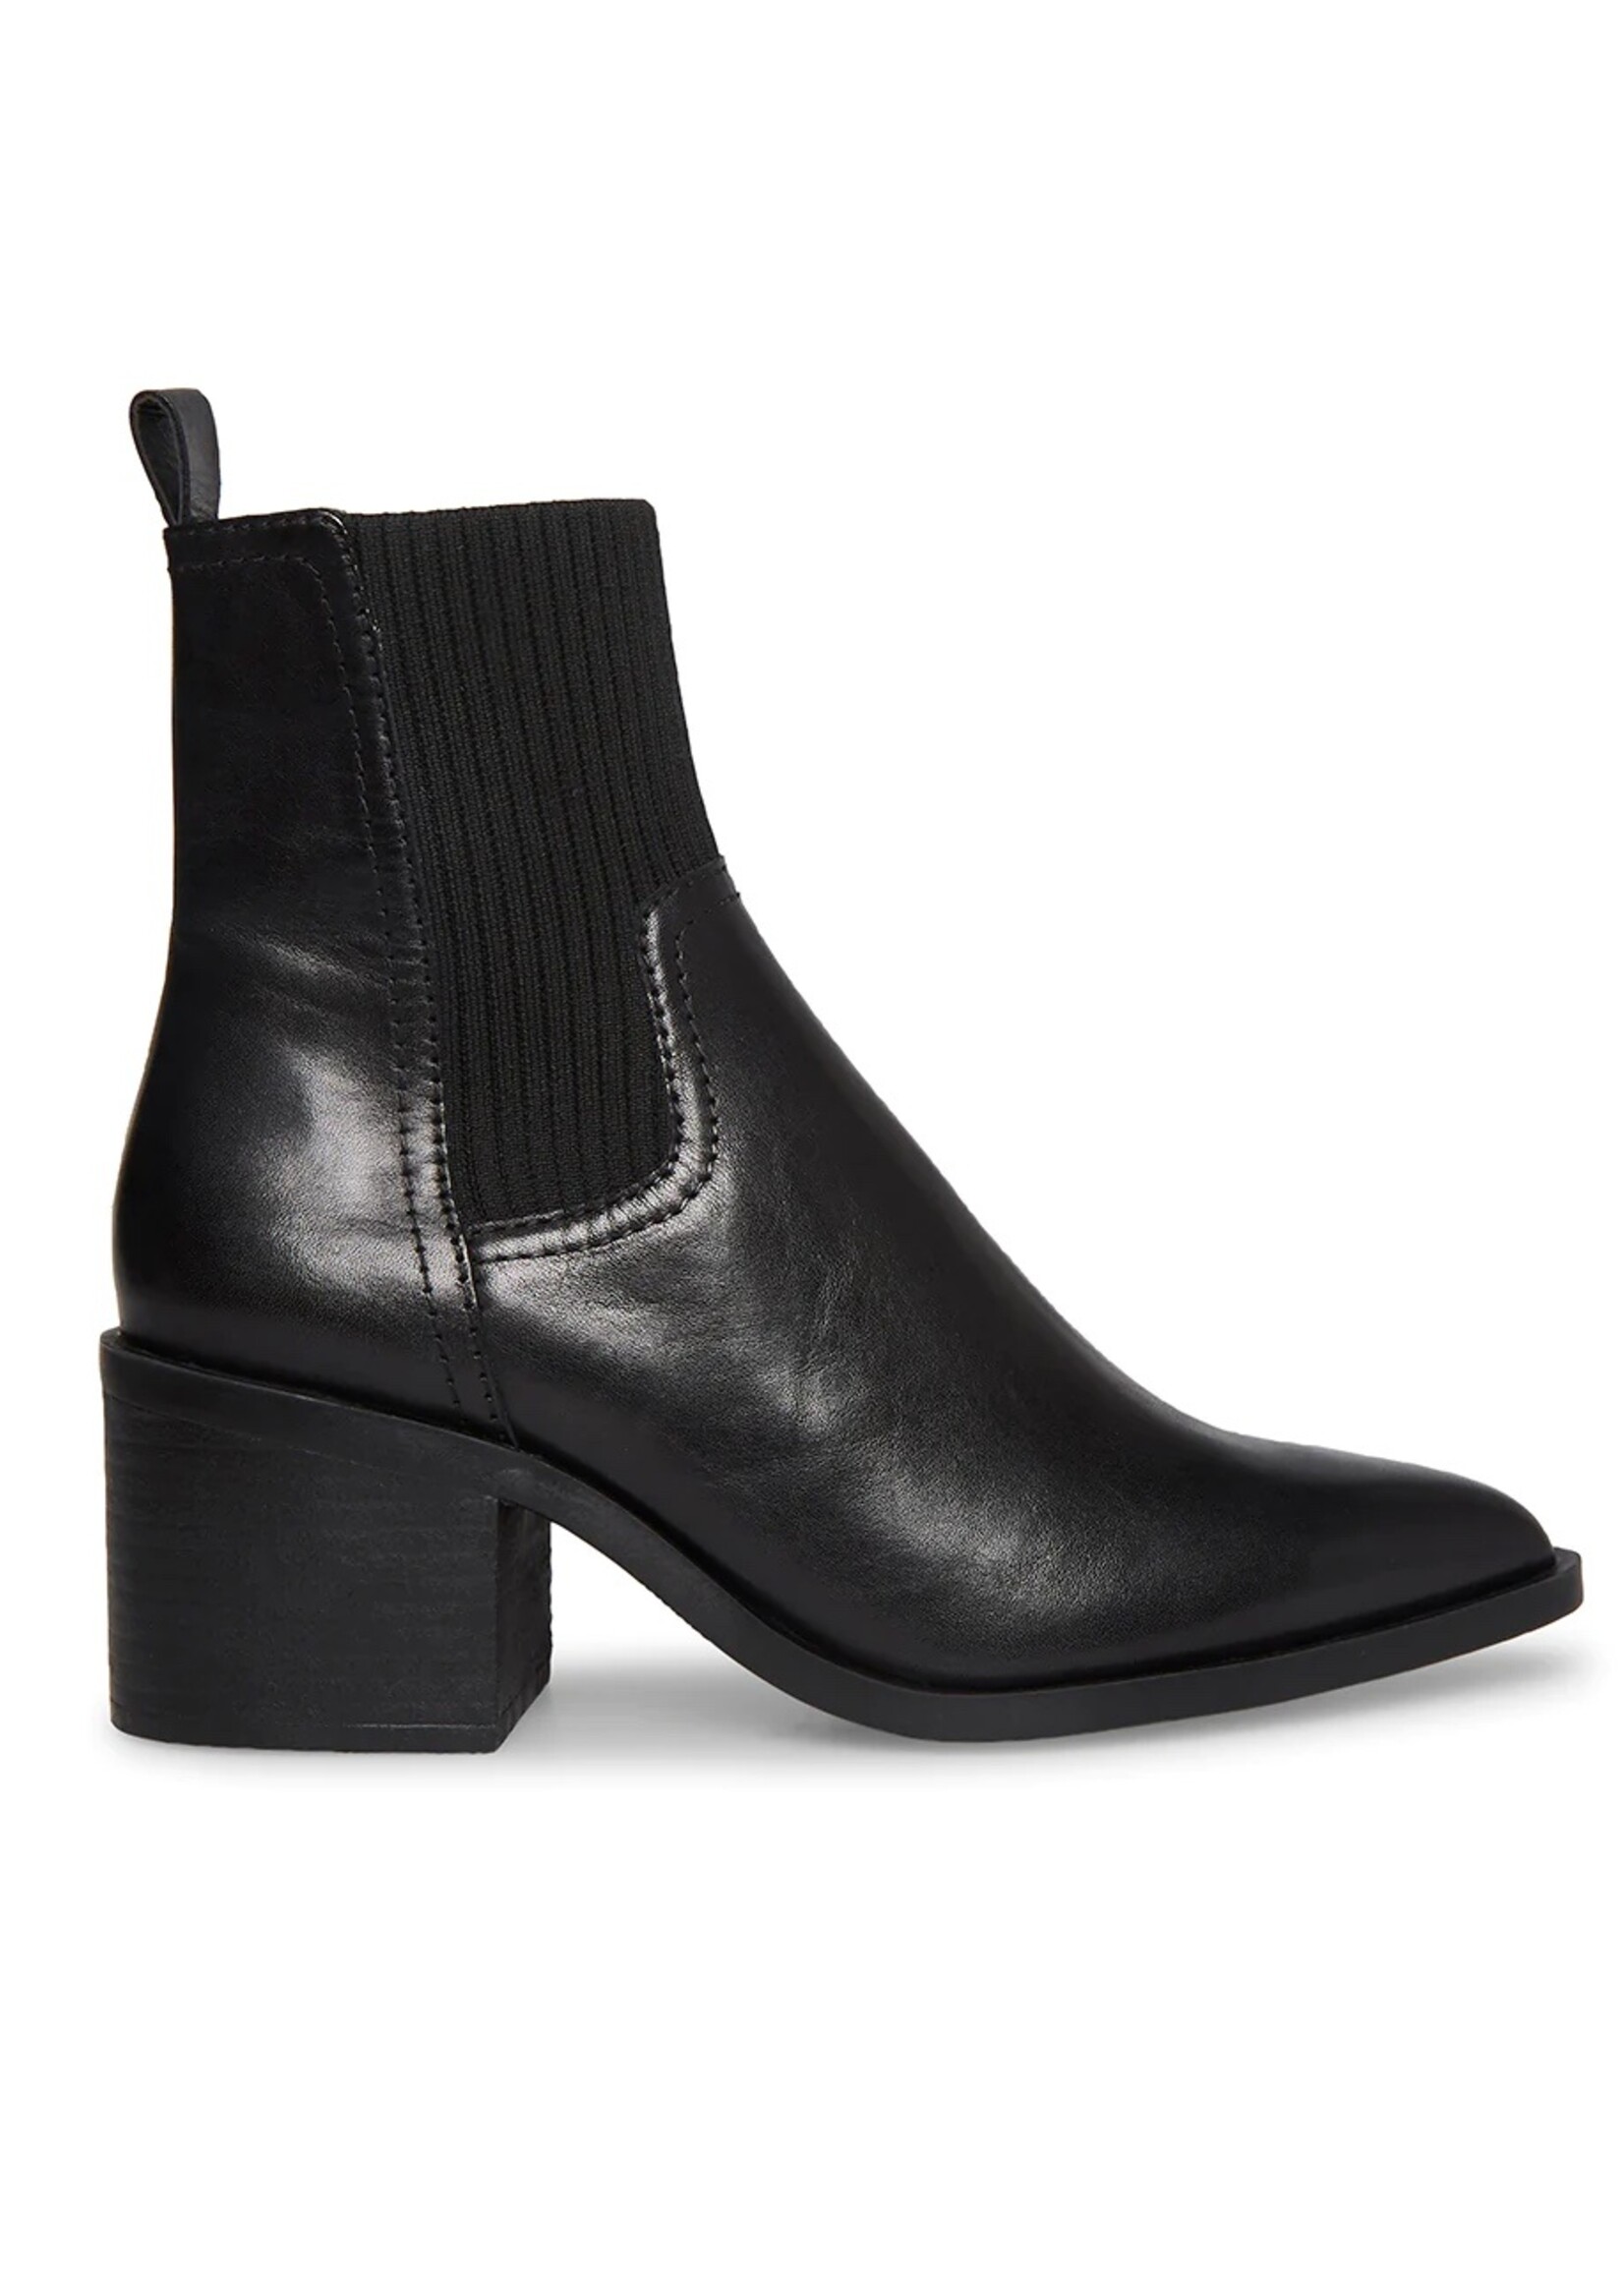 STEVE MADDEN ABRIEL leather boot